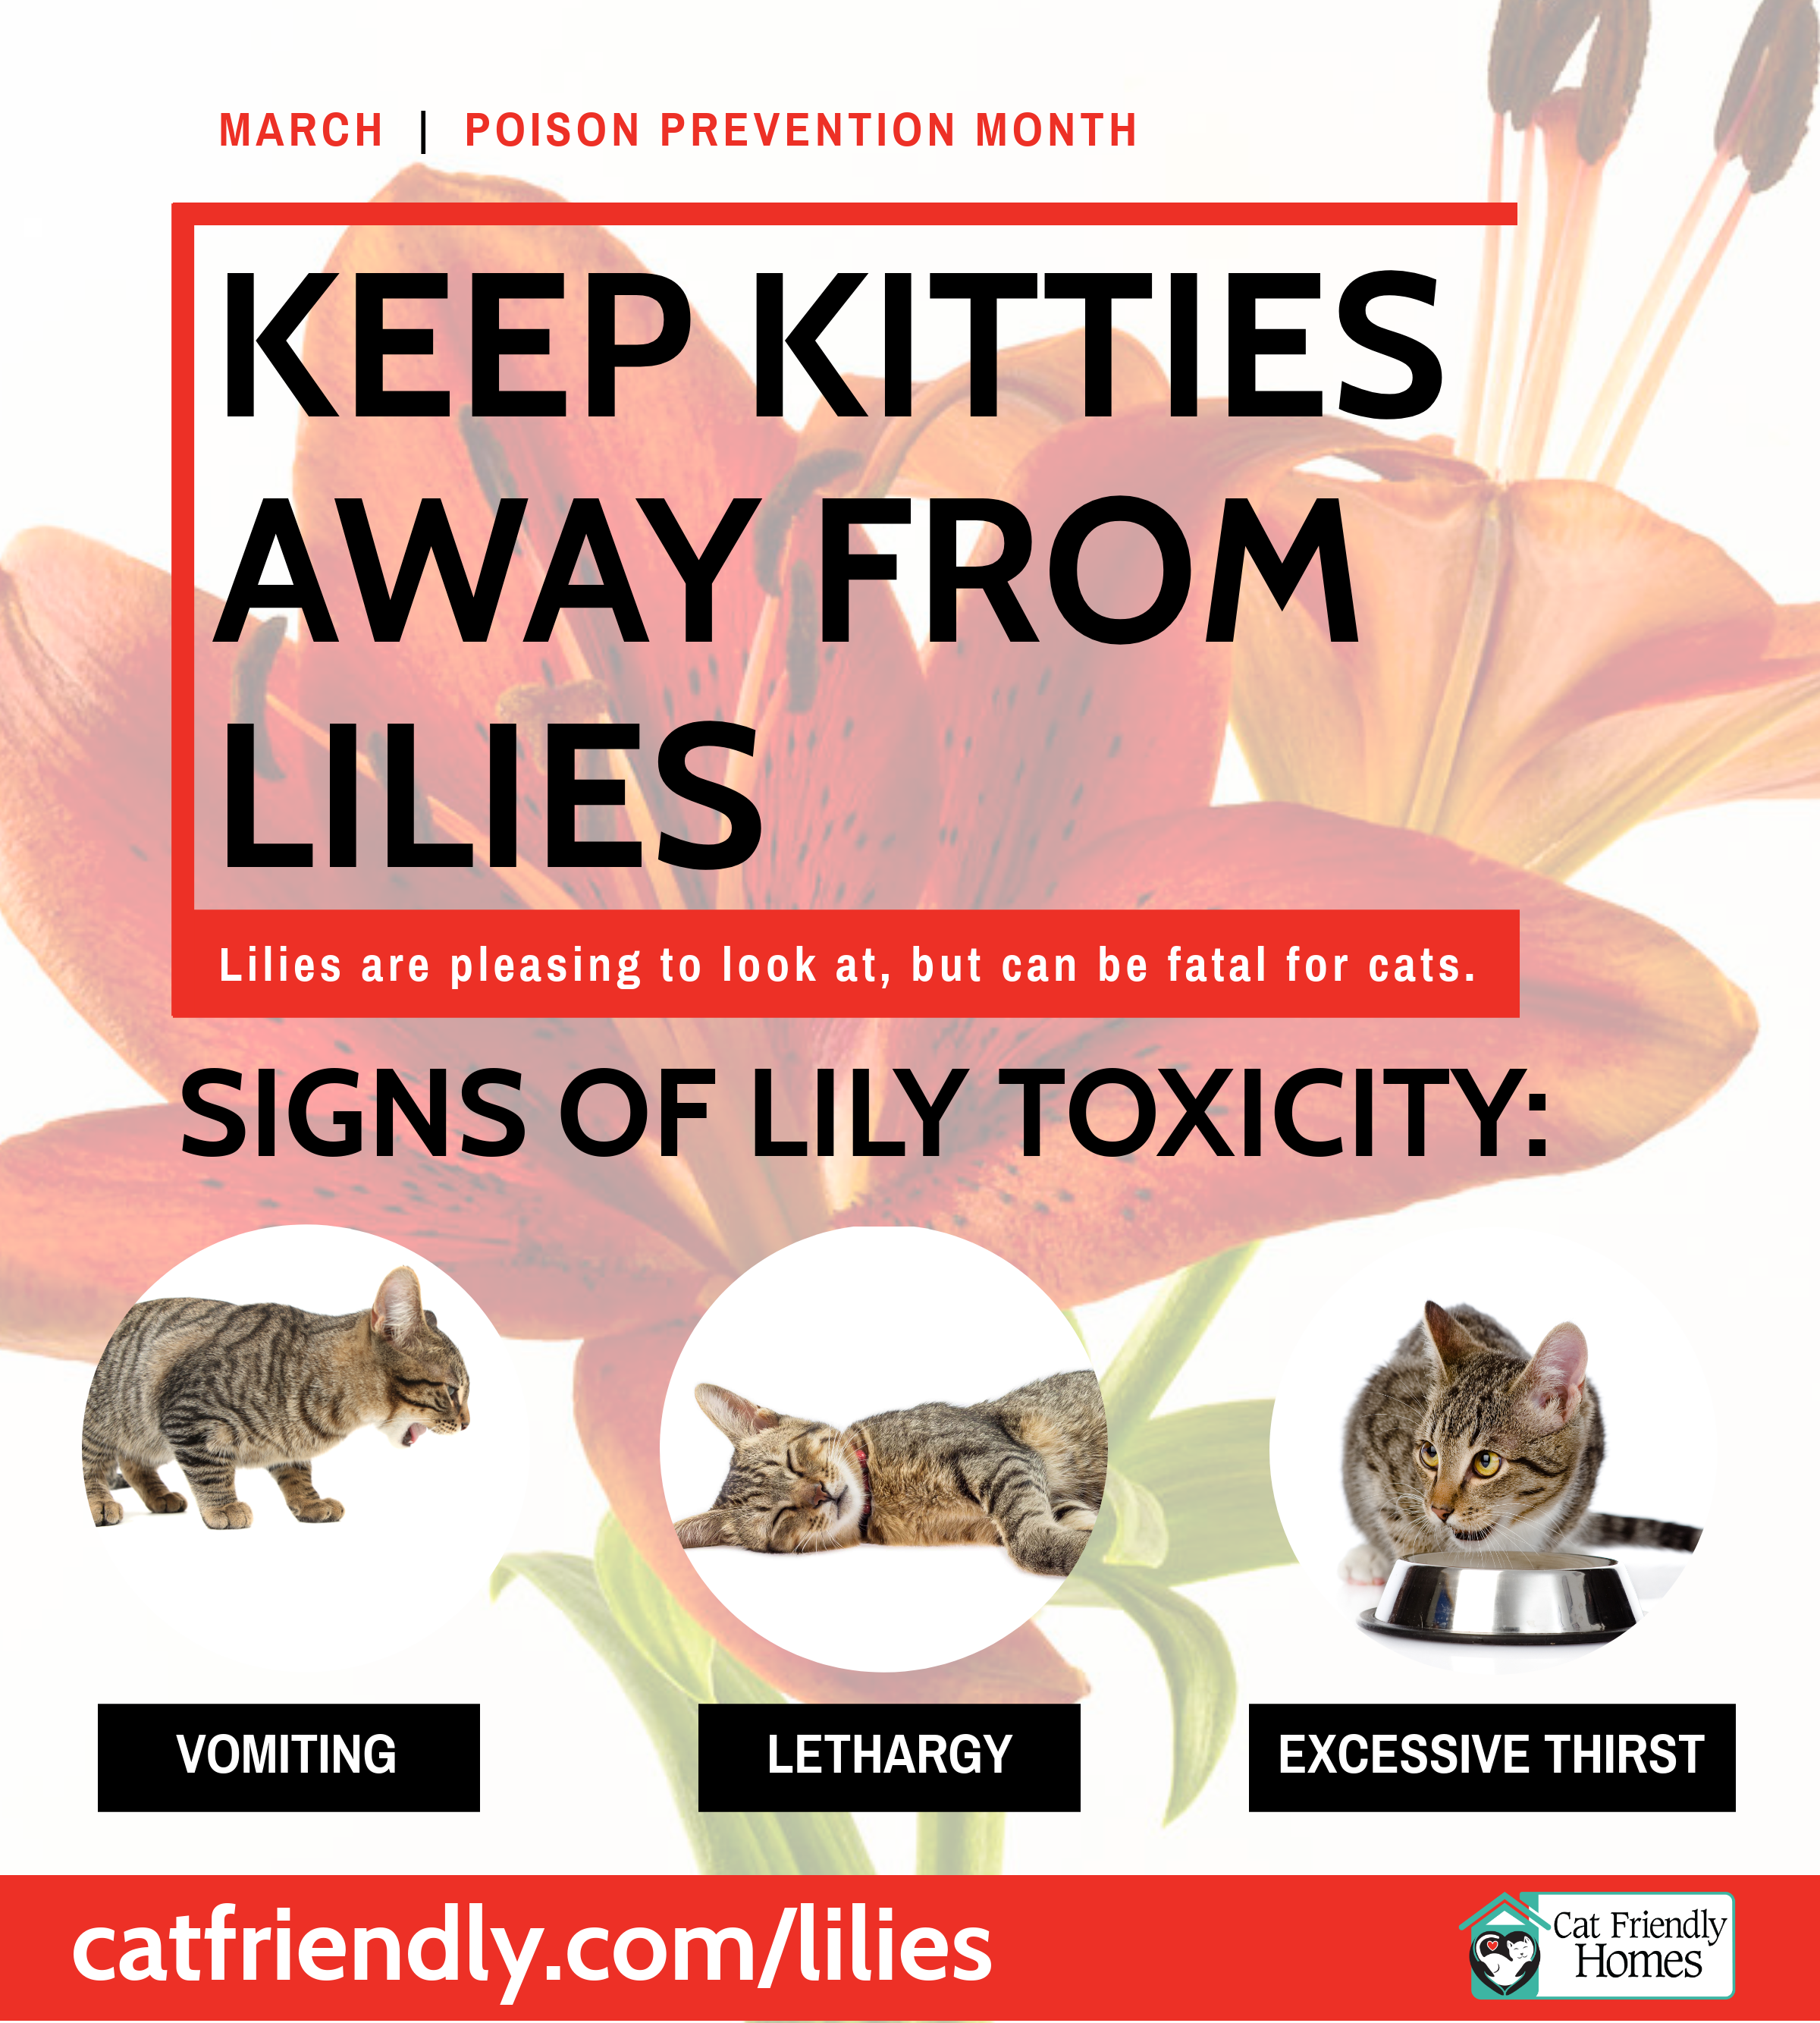 Kittens and lilies infographic